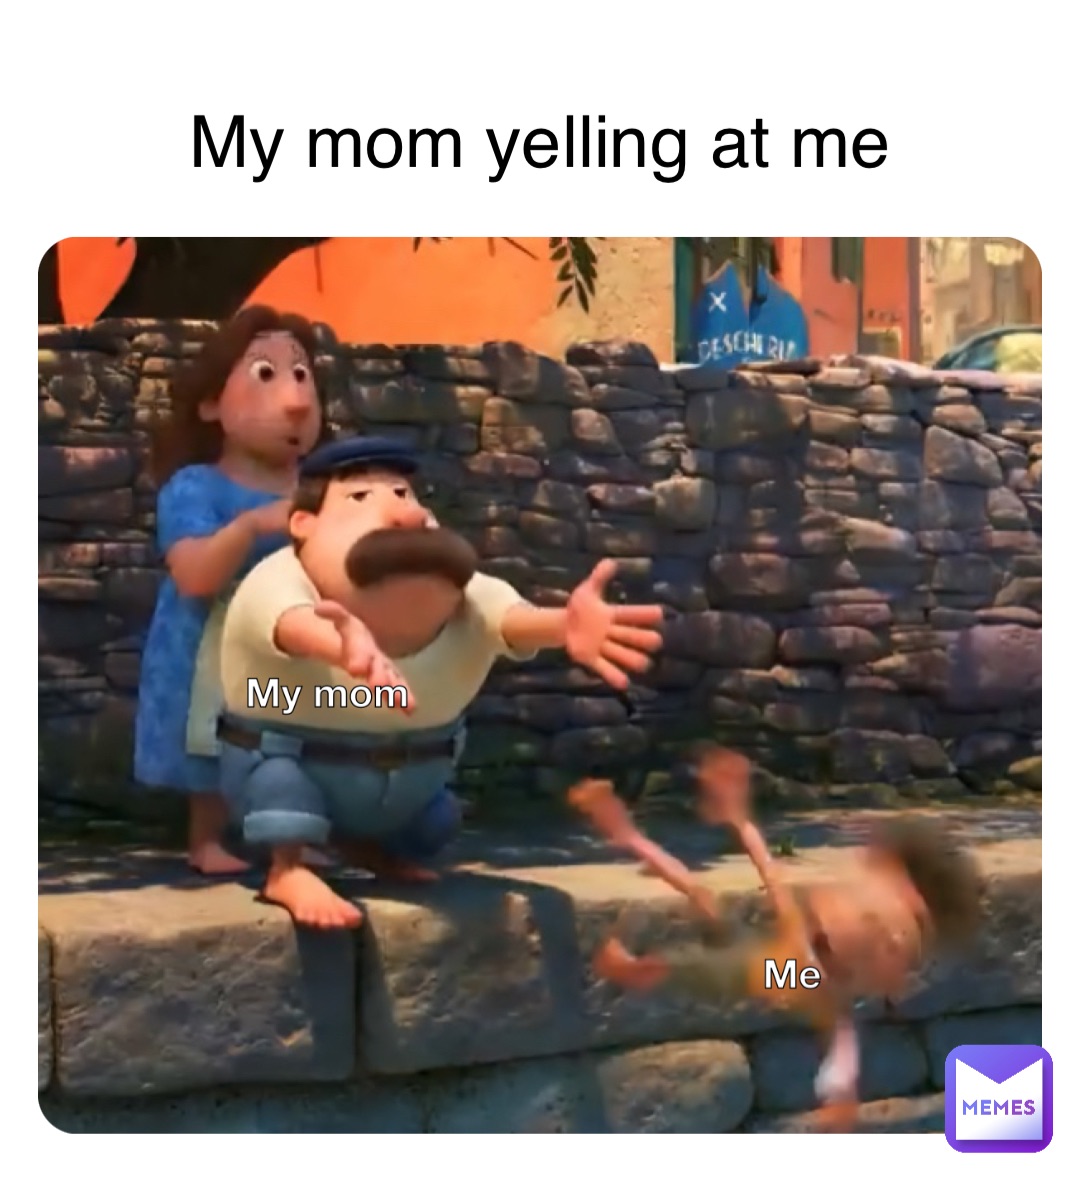 My mom yelling at me